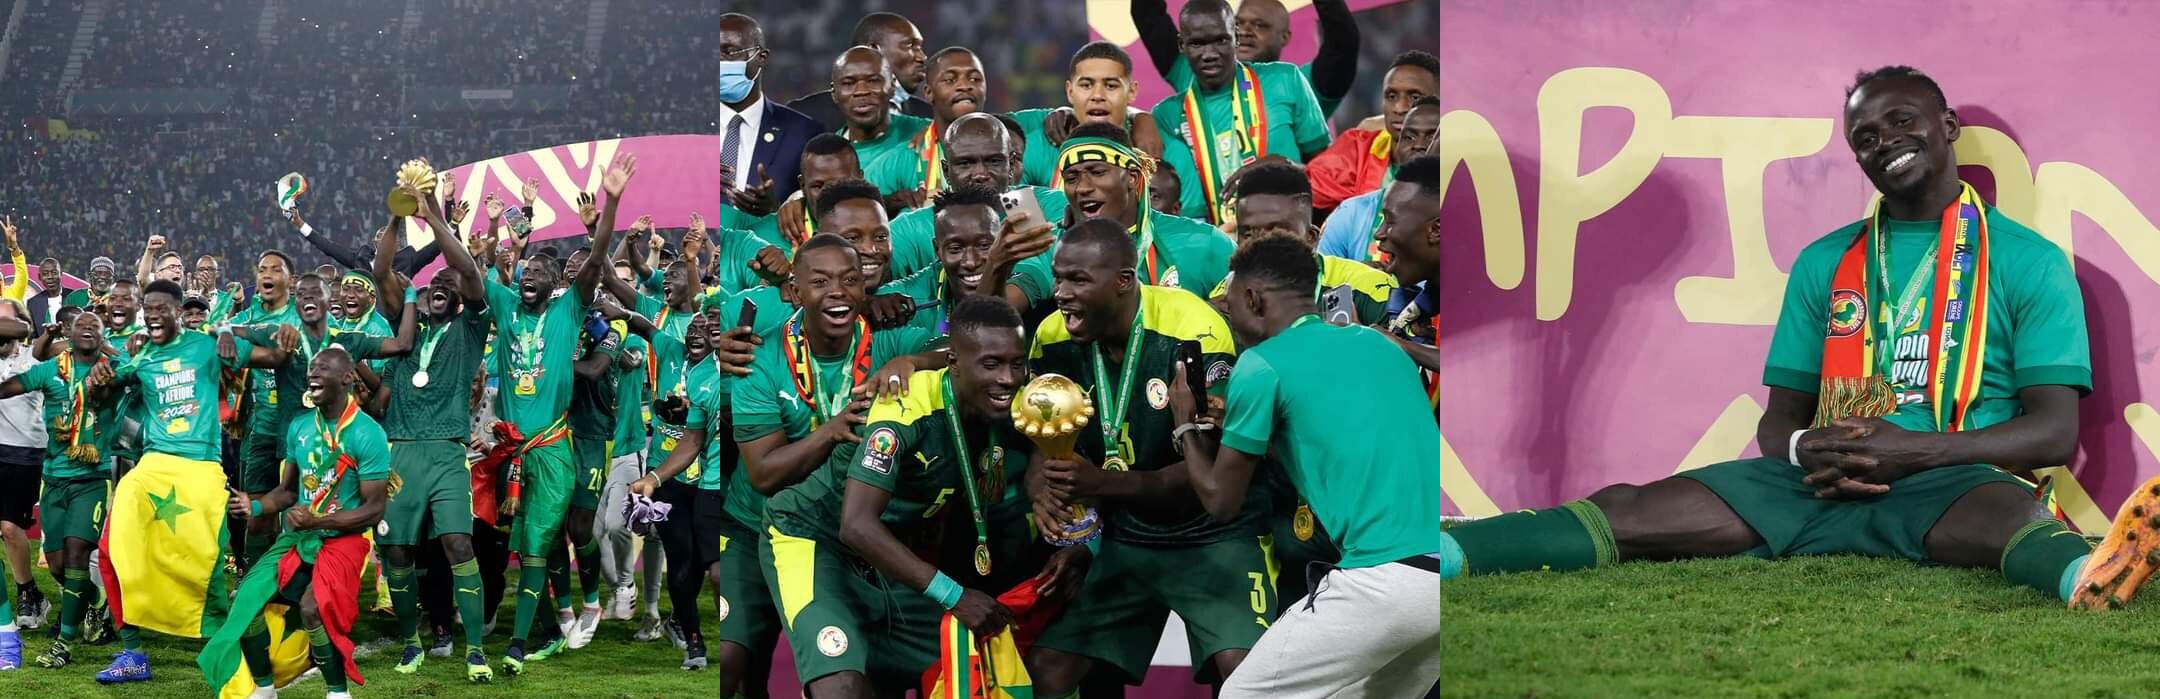 Senegal-Declares-Public-Holiday-To-Celebrate-Africa-Cup-Of-Nations-WIN,-Worldforum.jpg